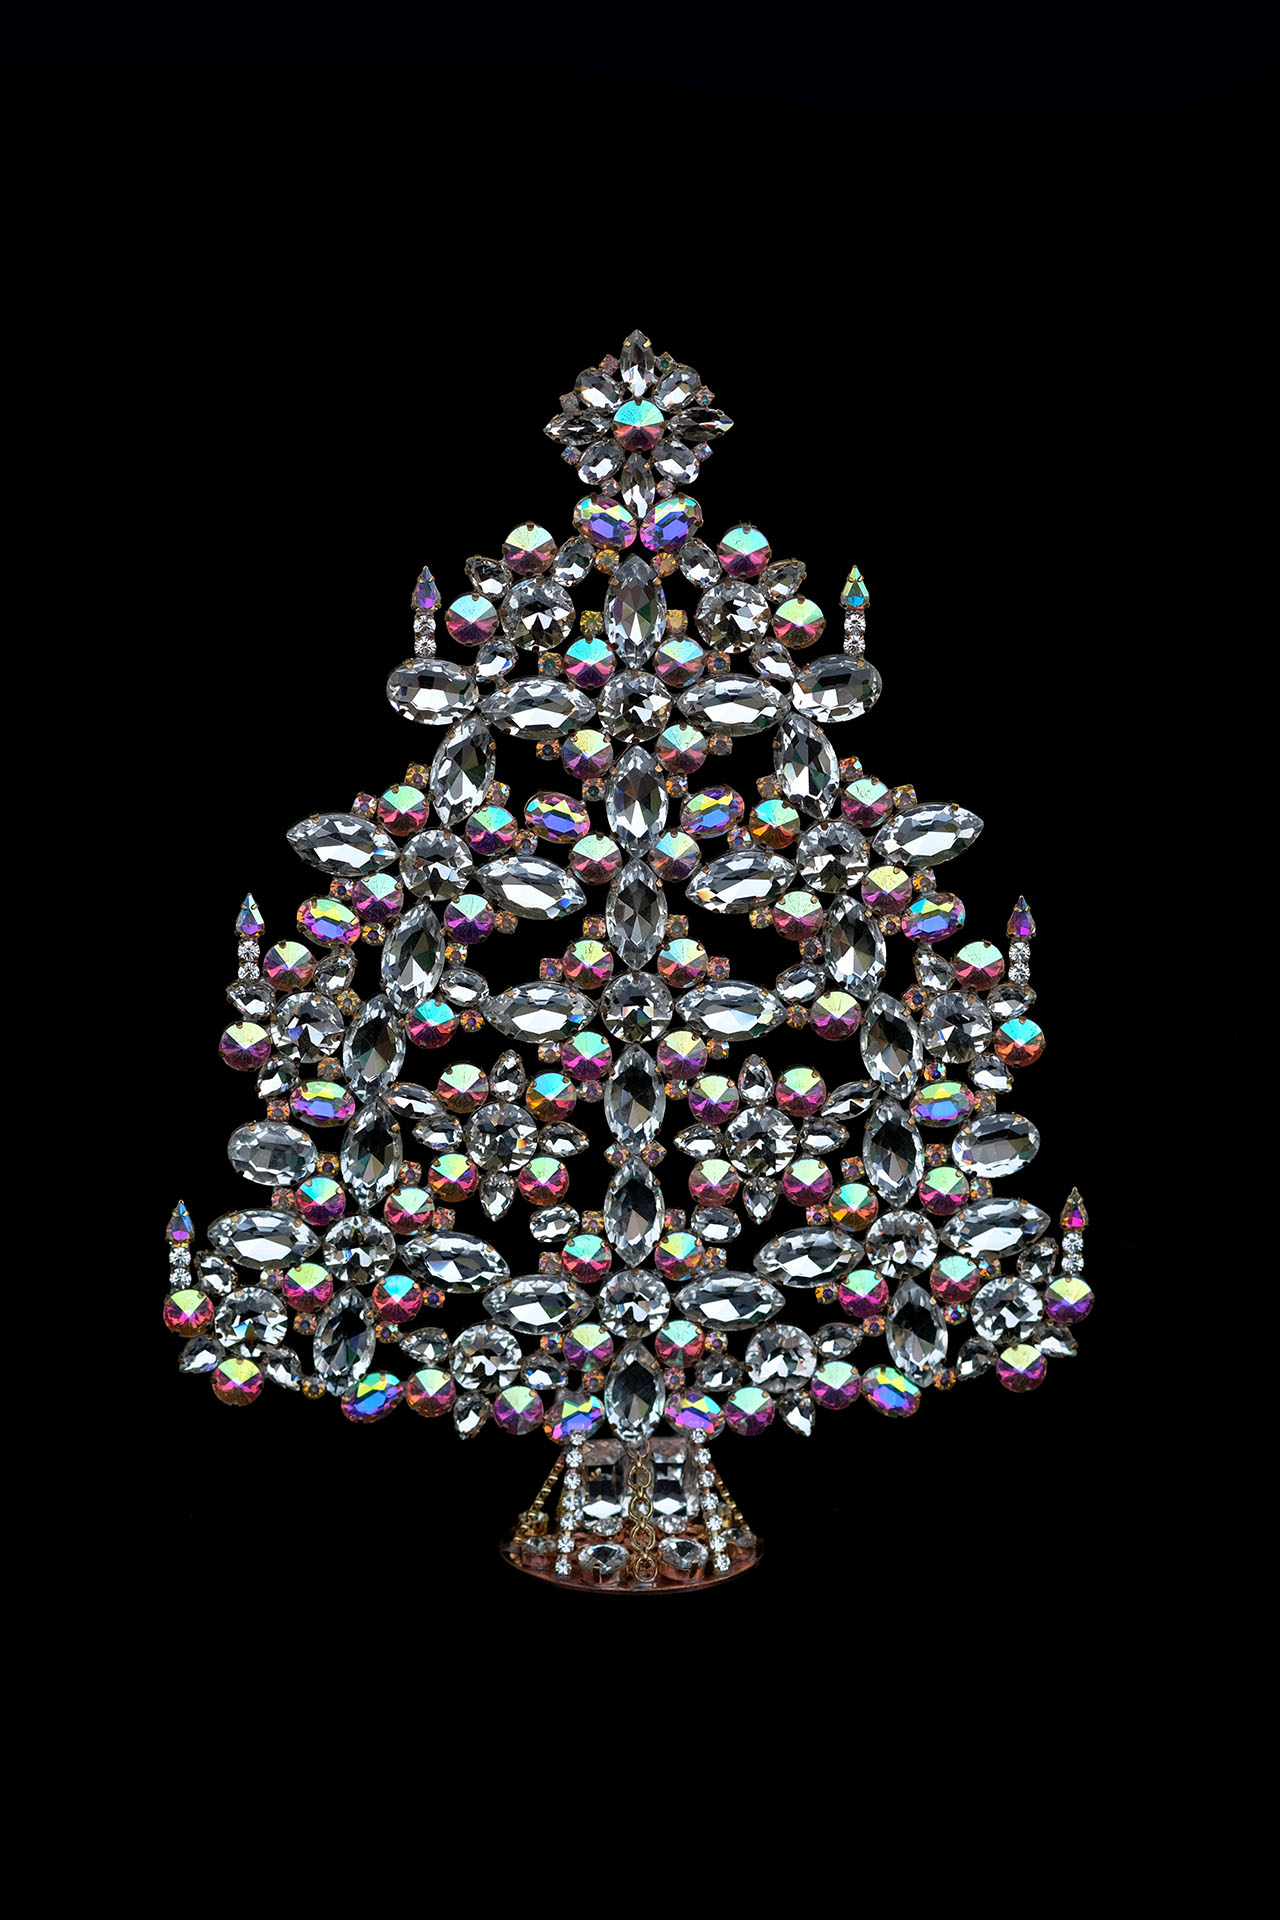 Vintage Czech tabletop Christmas tree - with crystals ornaments